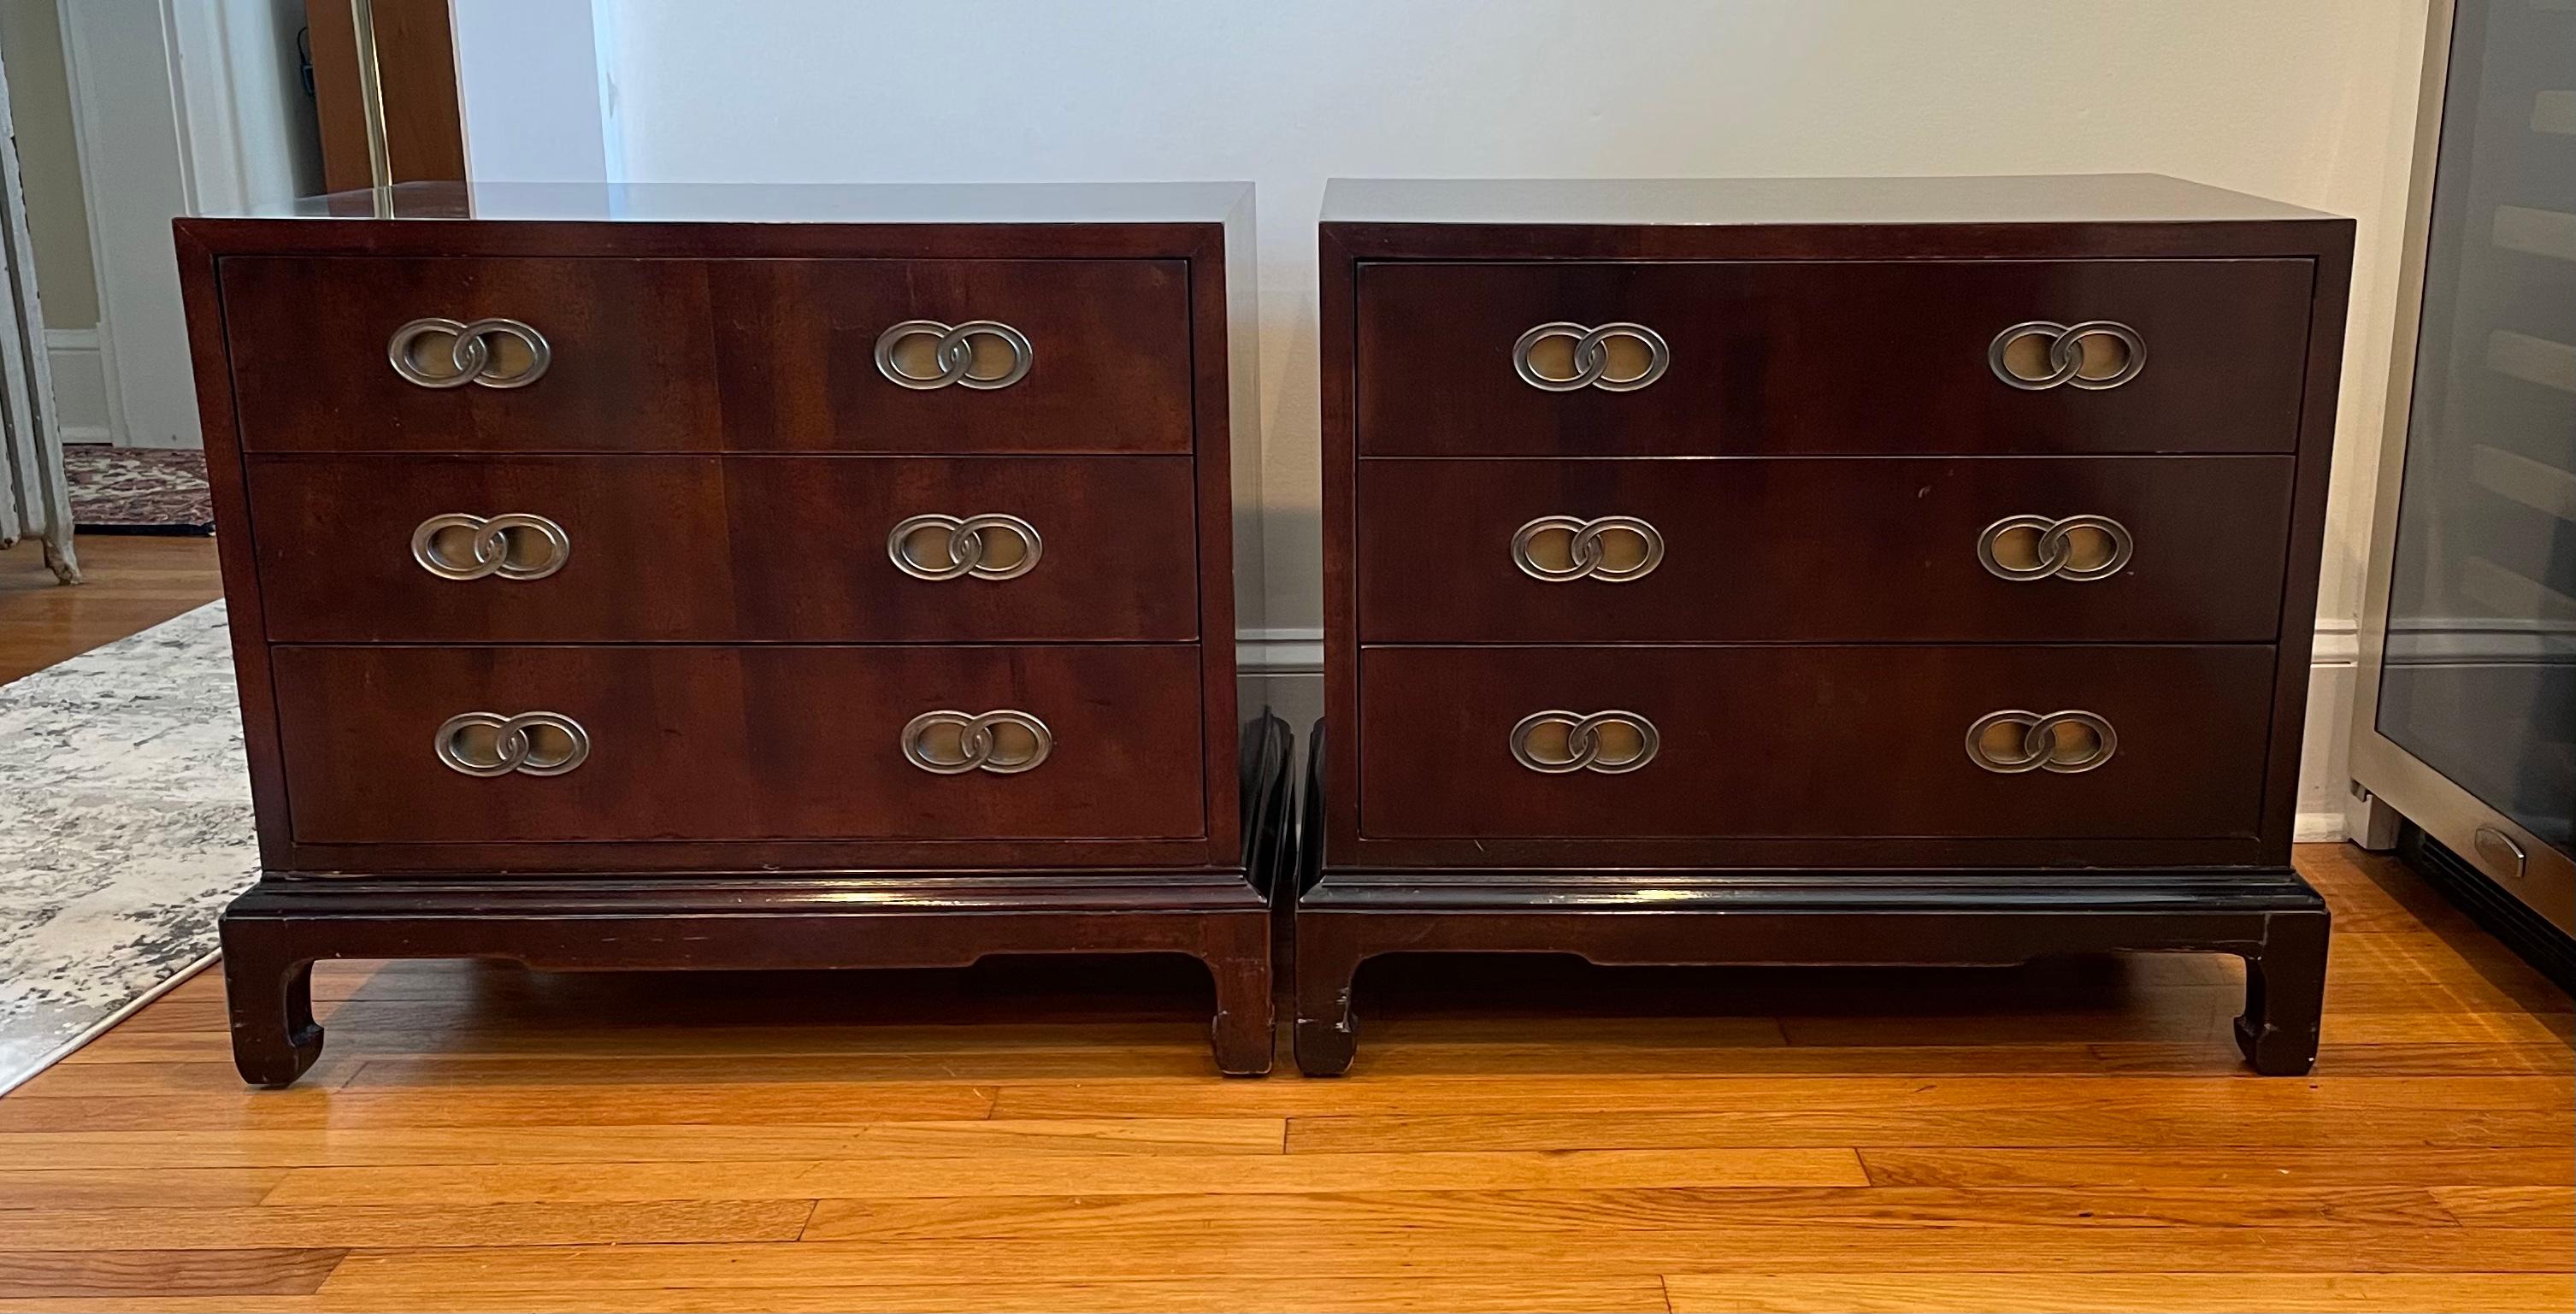 Ebonised bracket Ming style base 3 drawers mid-century nightstands by Henredon. Classic Michael Taylor double ring pulls. Custom glass tops for surface protection.